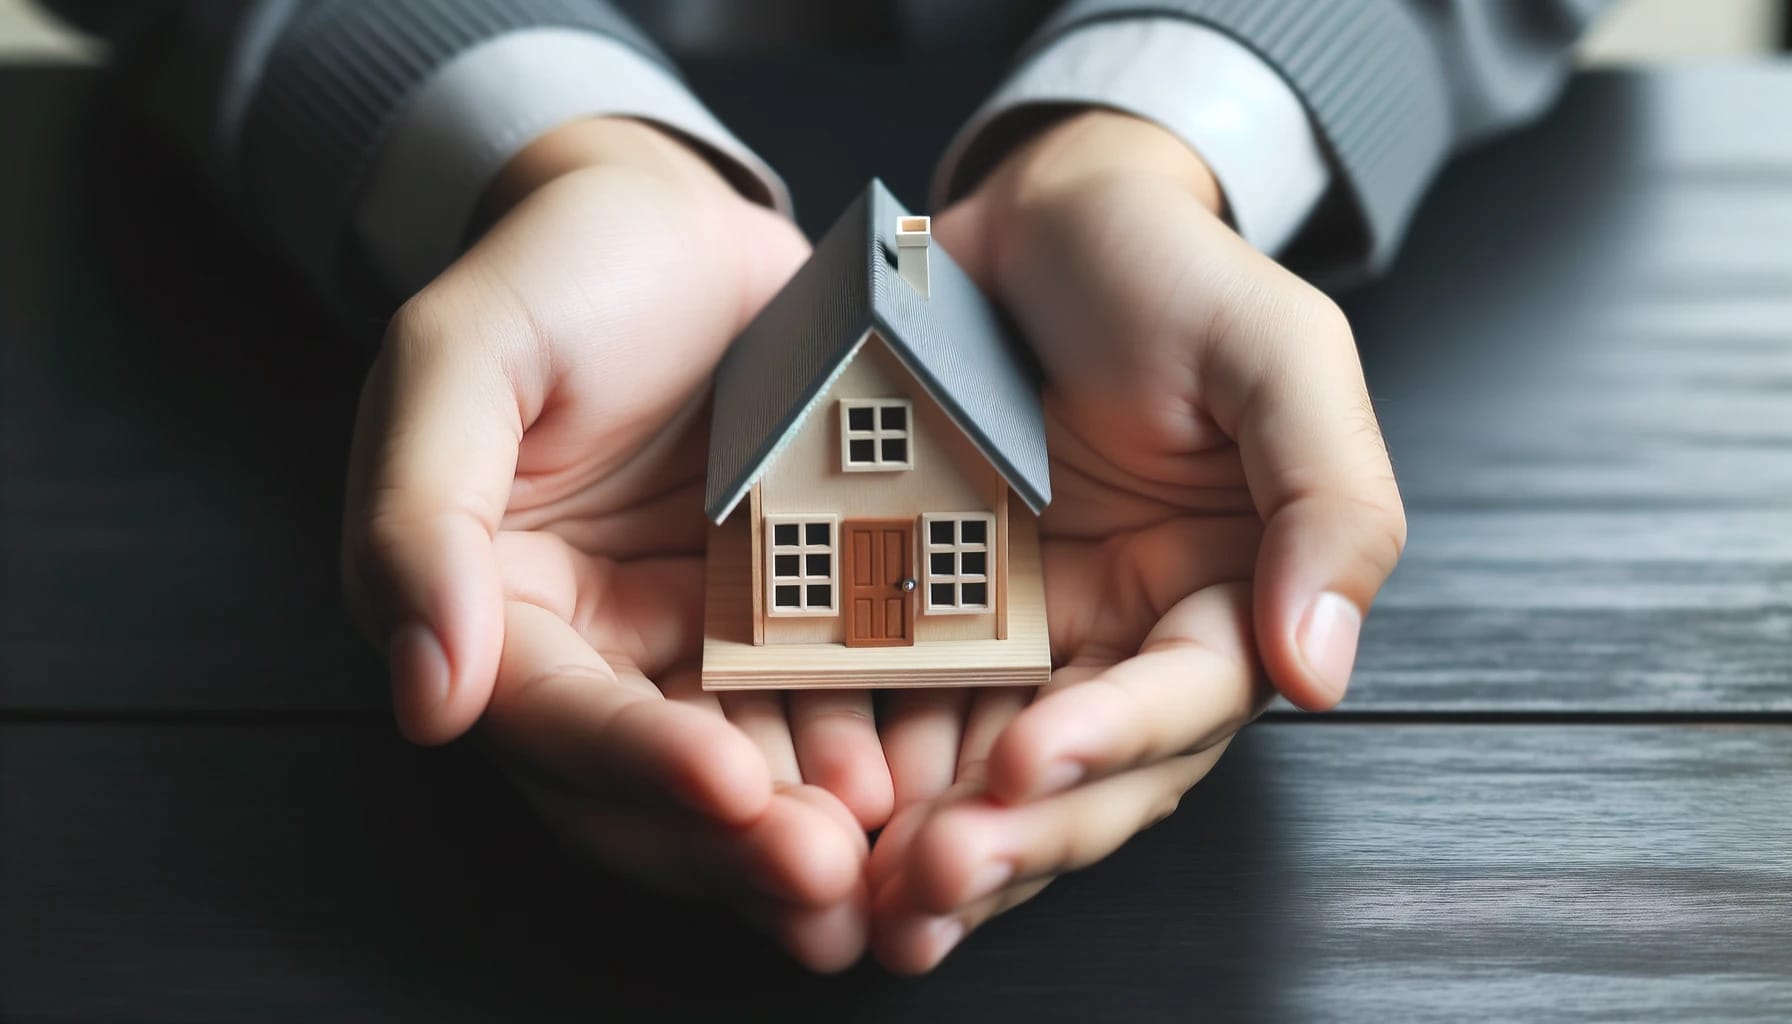 DALL·E 2023 10 17 17.57.46 Photo of hands holding a small house model symbolizing the dream and planning of home ownership